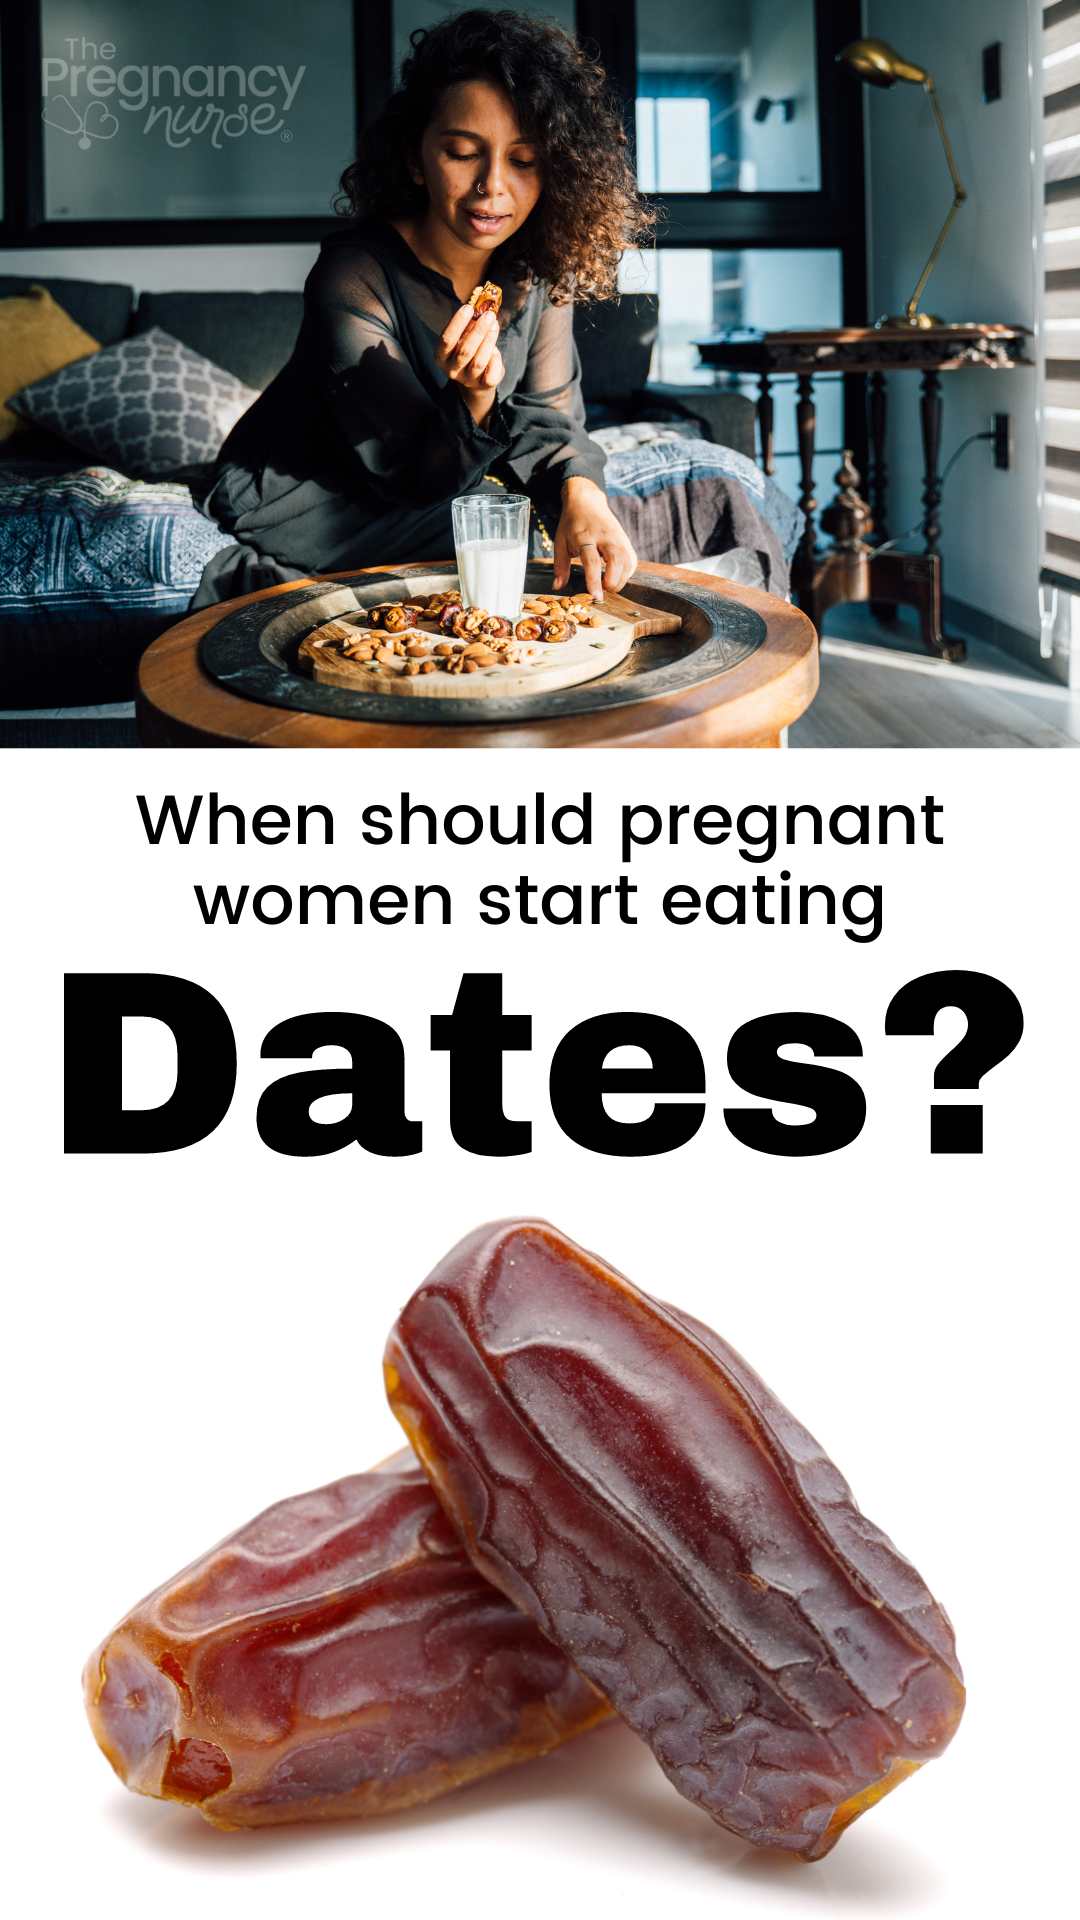 Are you pregnant or planning to be? It's time to uncover the magic of dates! Find out when to start eating dates during pregnancy and how they can positively impact your health and the wellbeing of your baby. Learn about the research-backed benefits and practical tips to make the most of this pregnancy superfood.